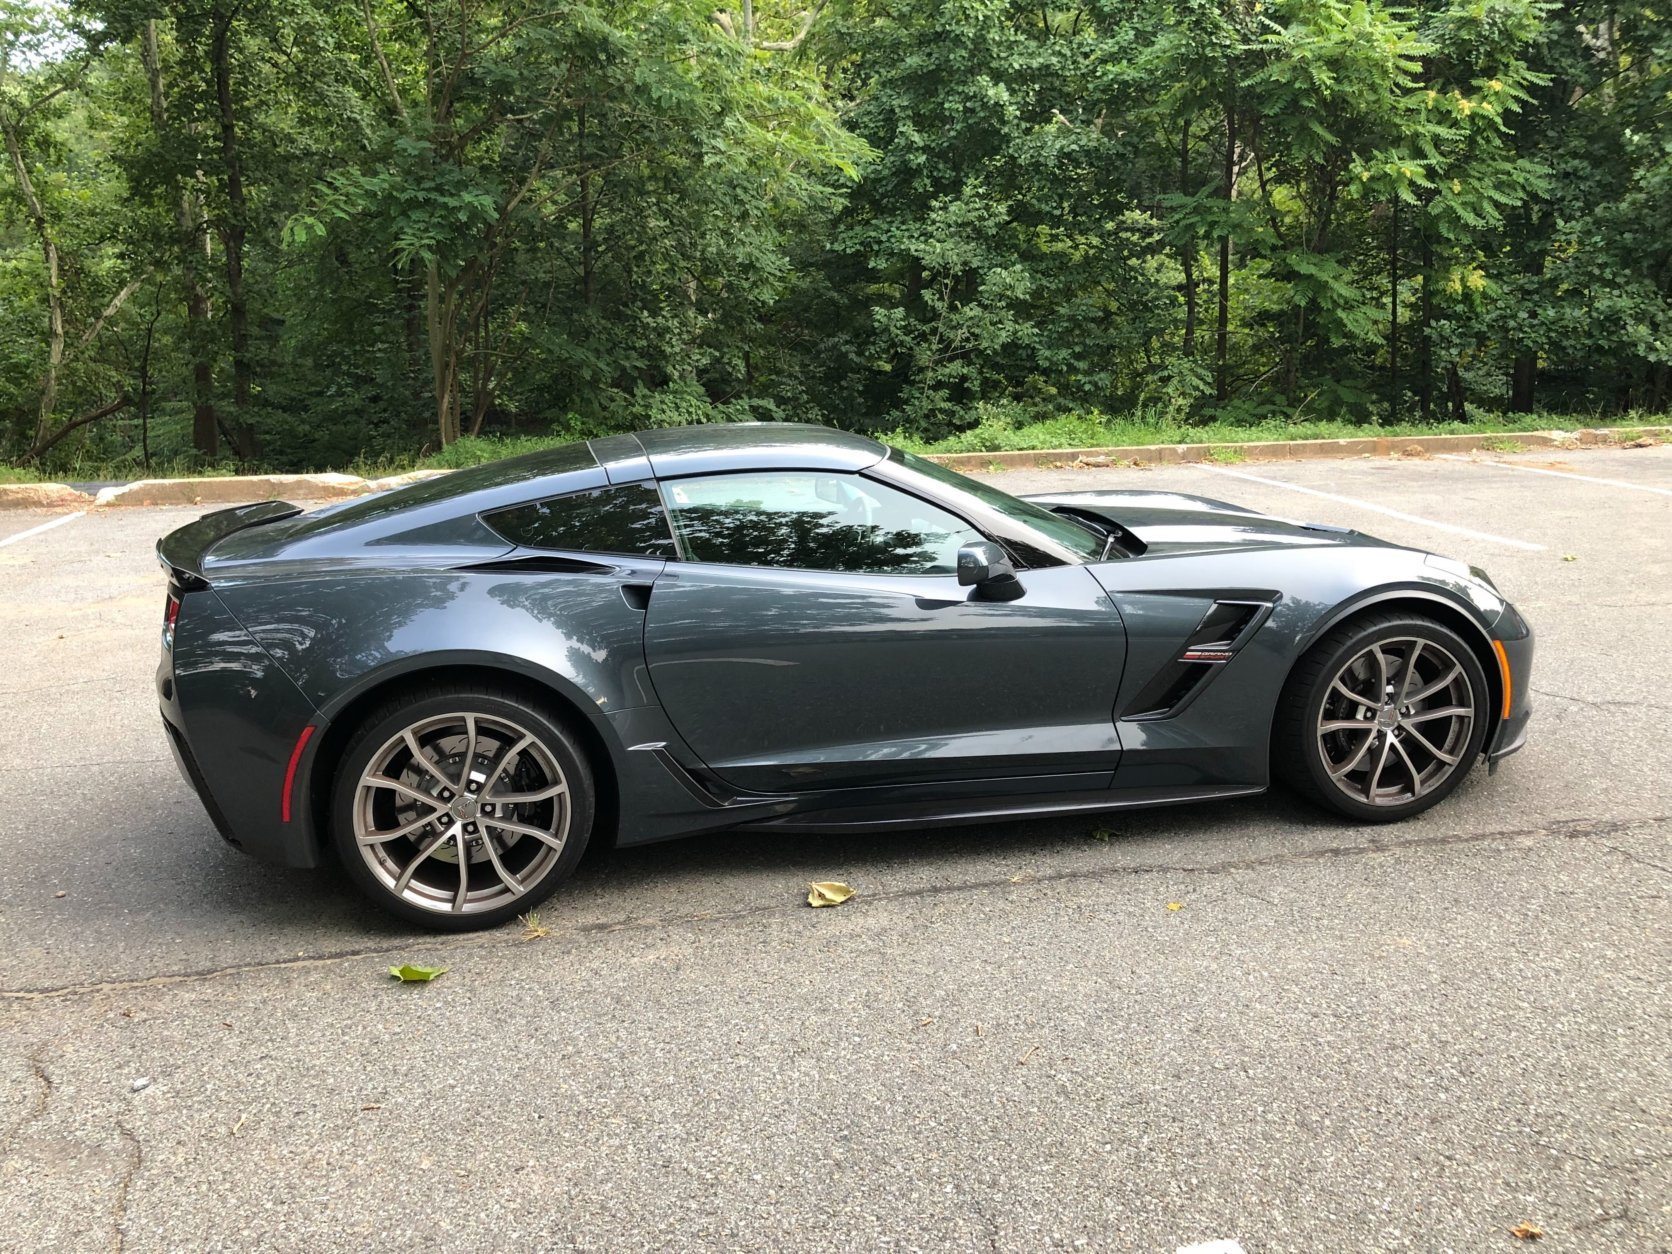 <h3><strong>2019 Chevrolet Corvette Stingray</strong></h3>
<p><strong>Purchase Deal: </strong>0% financing for 84 months or 120-day first payment deferral</p>
